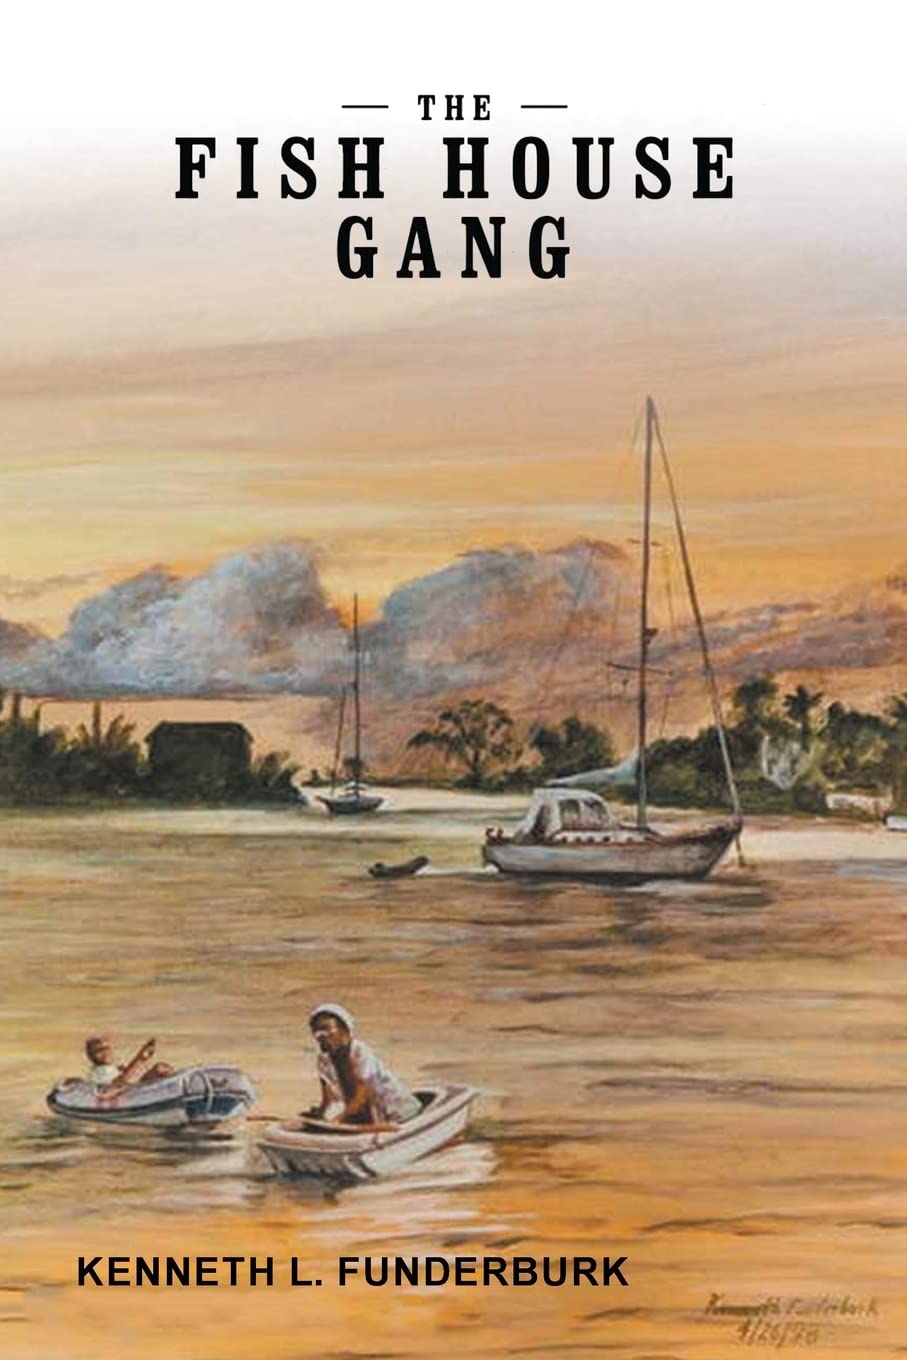 The Fish House Gang, by Author’s Tranquility Press 12